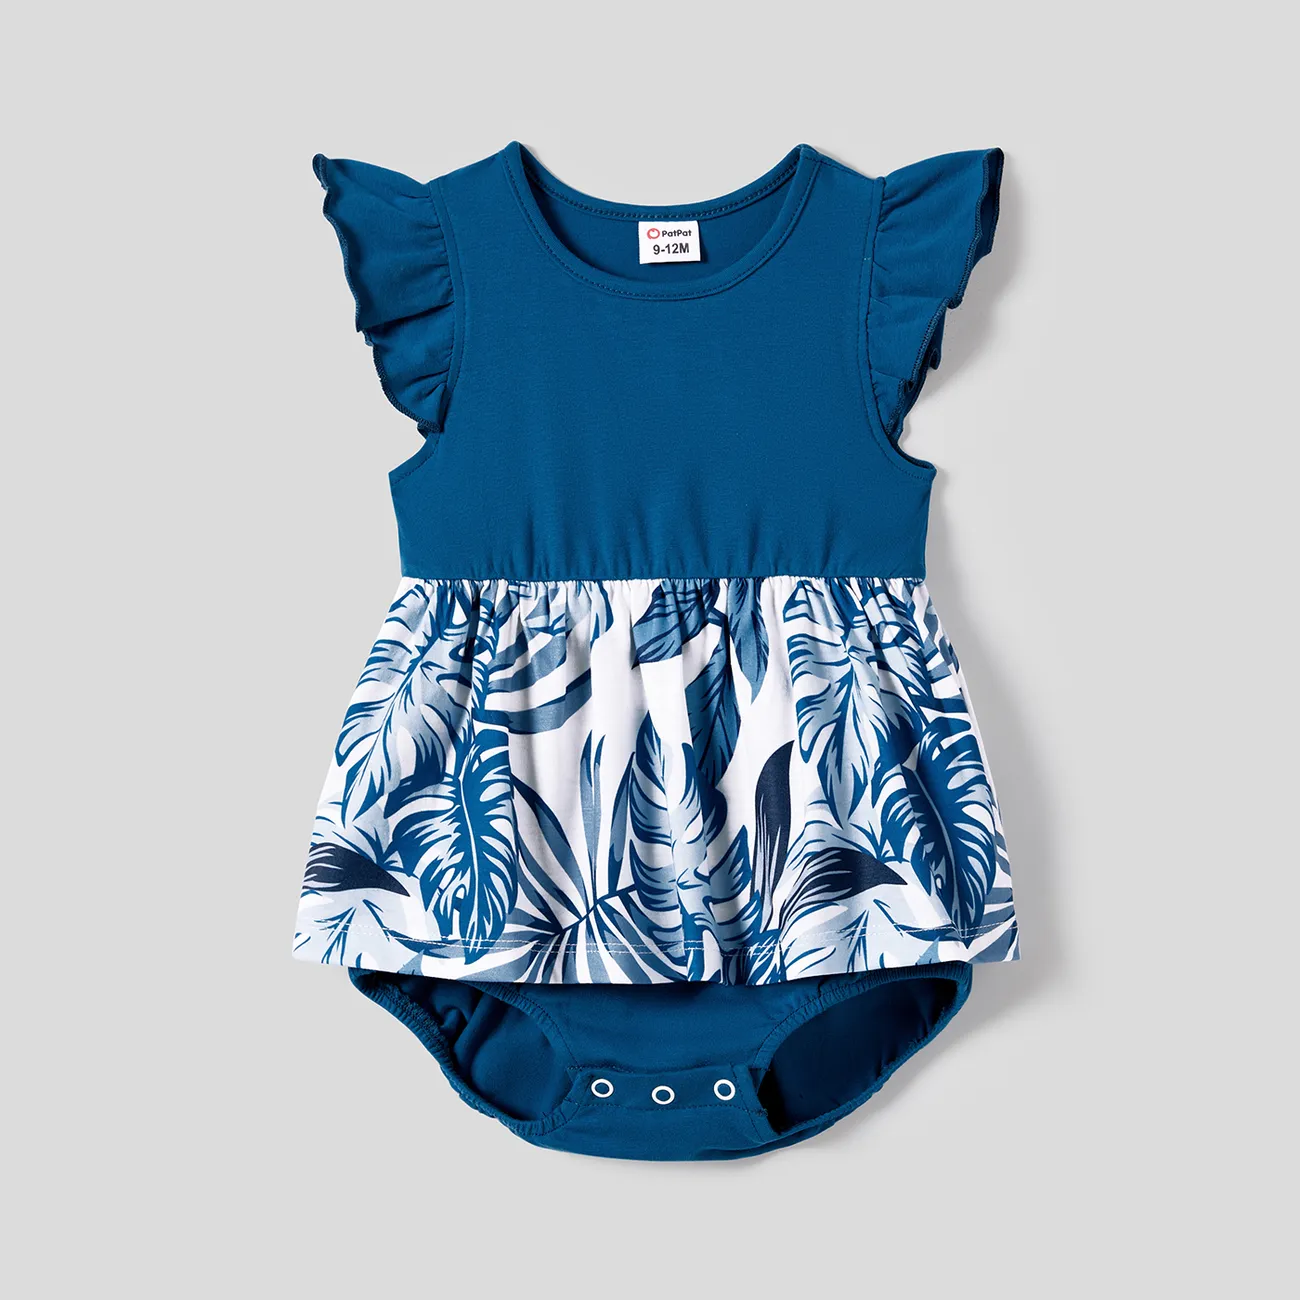 Family Matching Plant Print Splice Belted Tank Dresses and Color Block Short-sleeve T-shirts Sets Blue big image 1